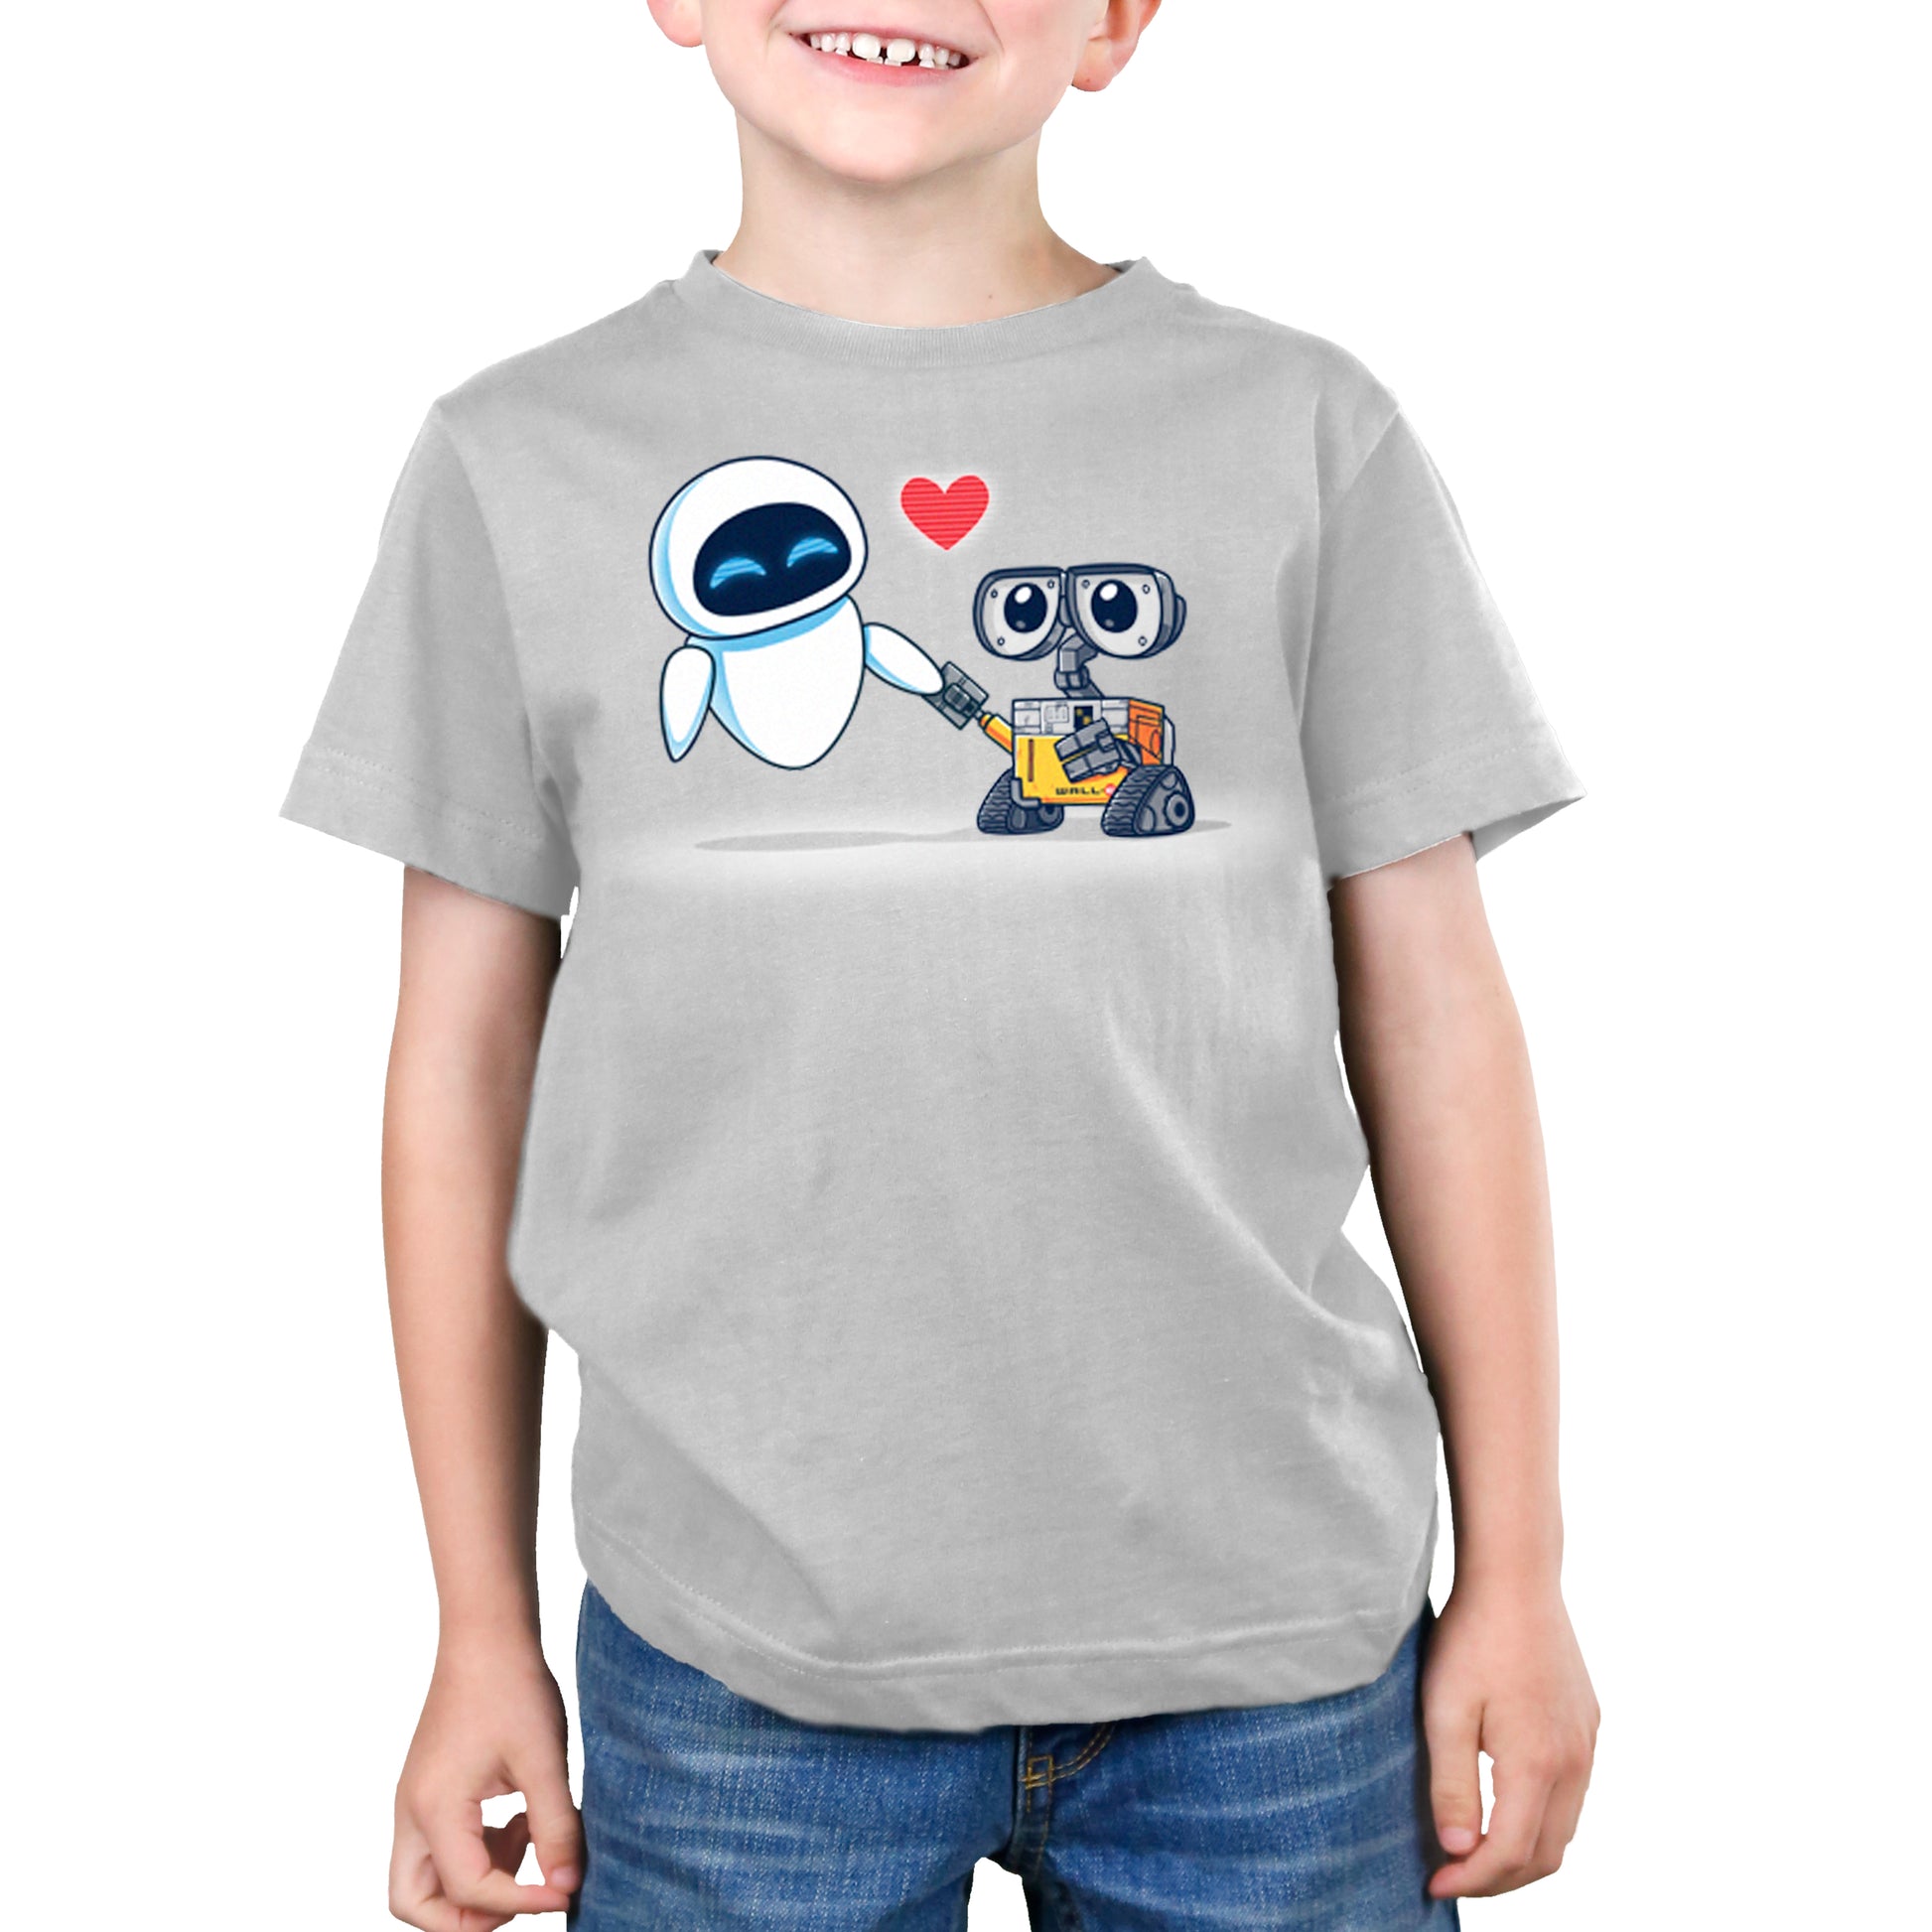 A boy wearing a Disney branded gray t-shirt with an image of Wall-E and Eve, providing comfort.